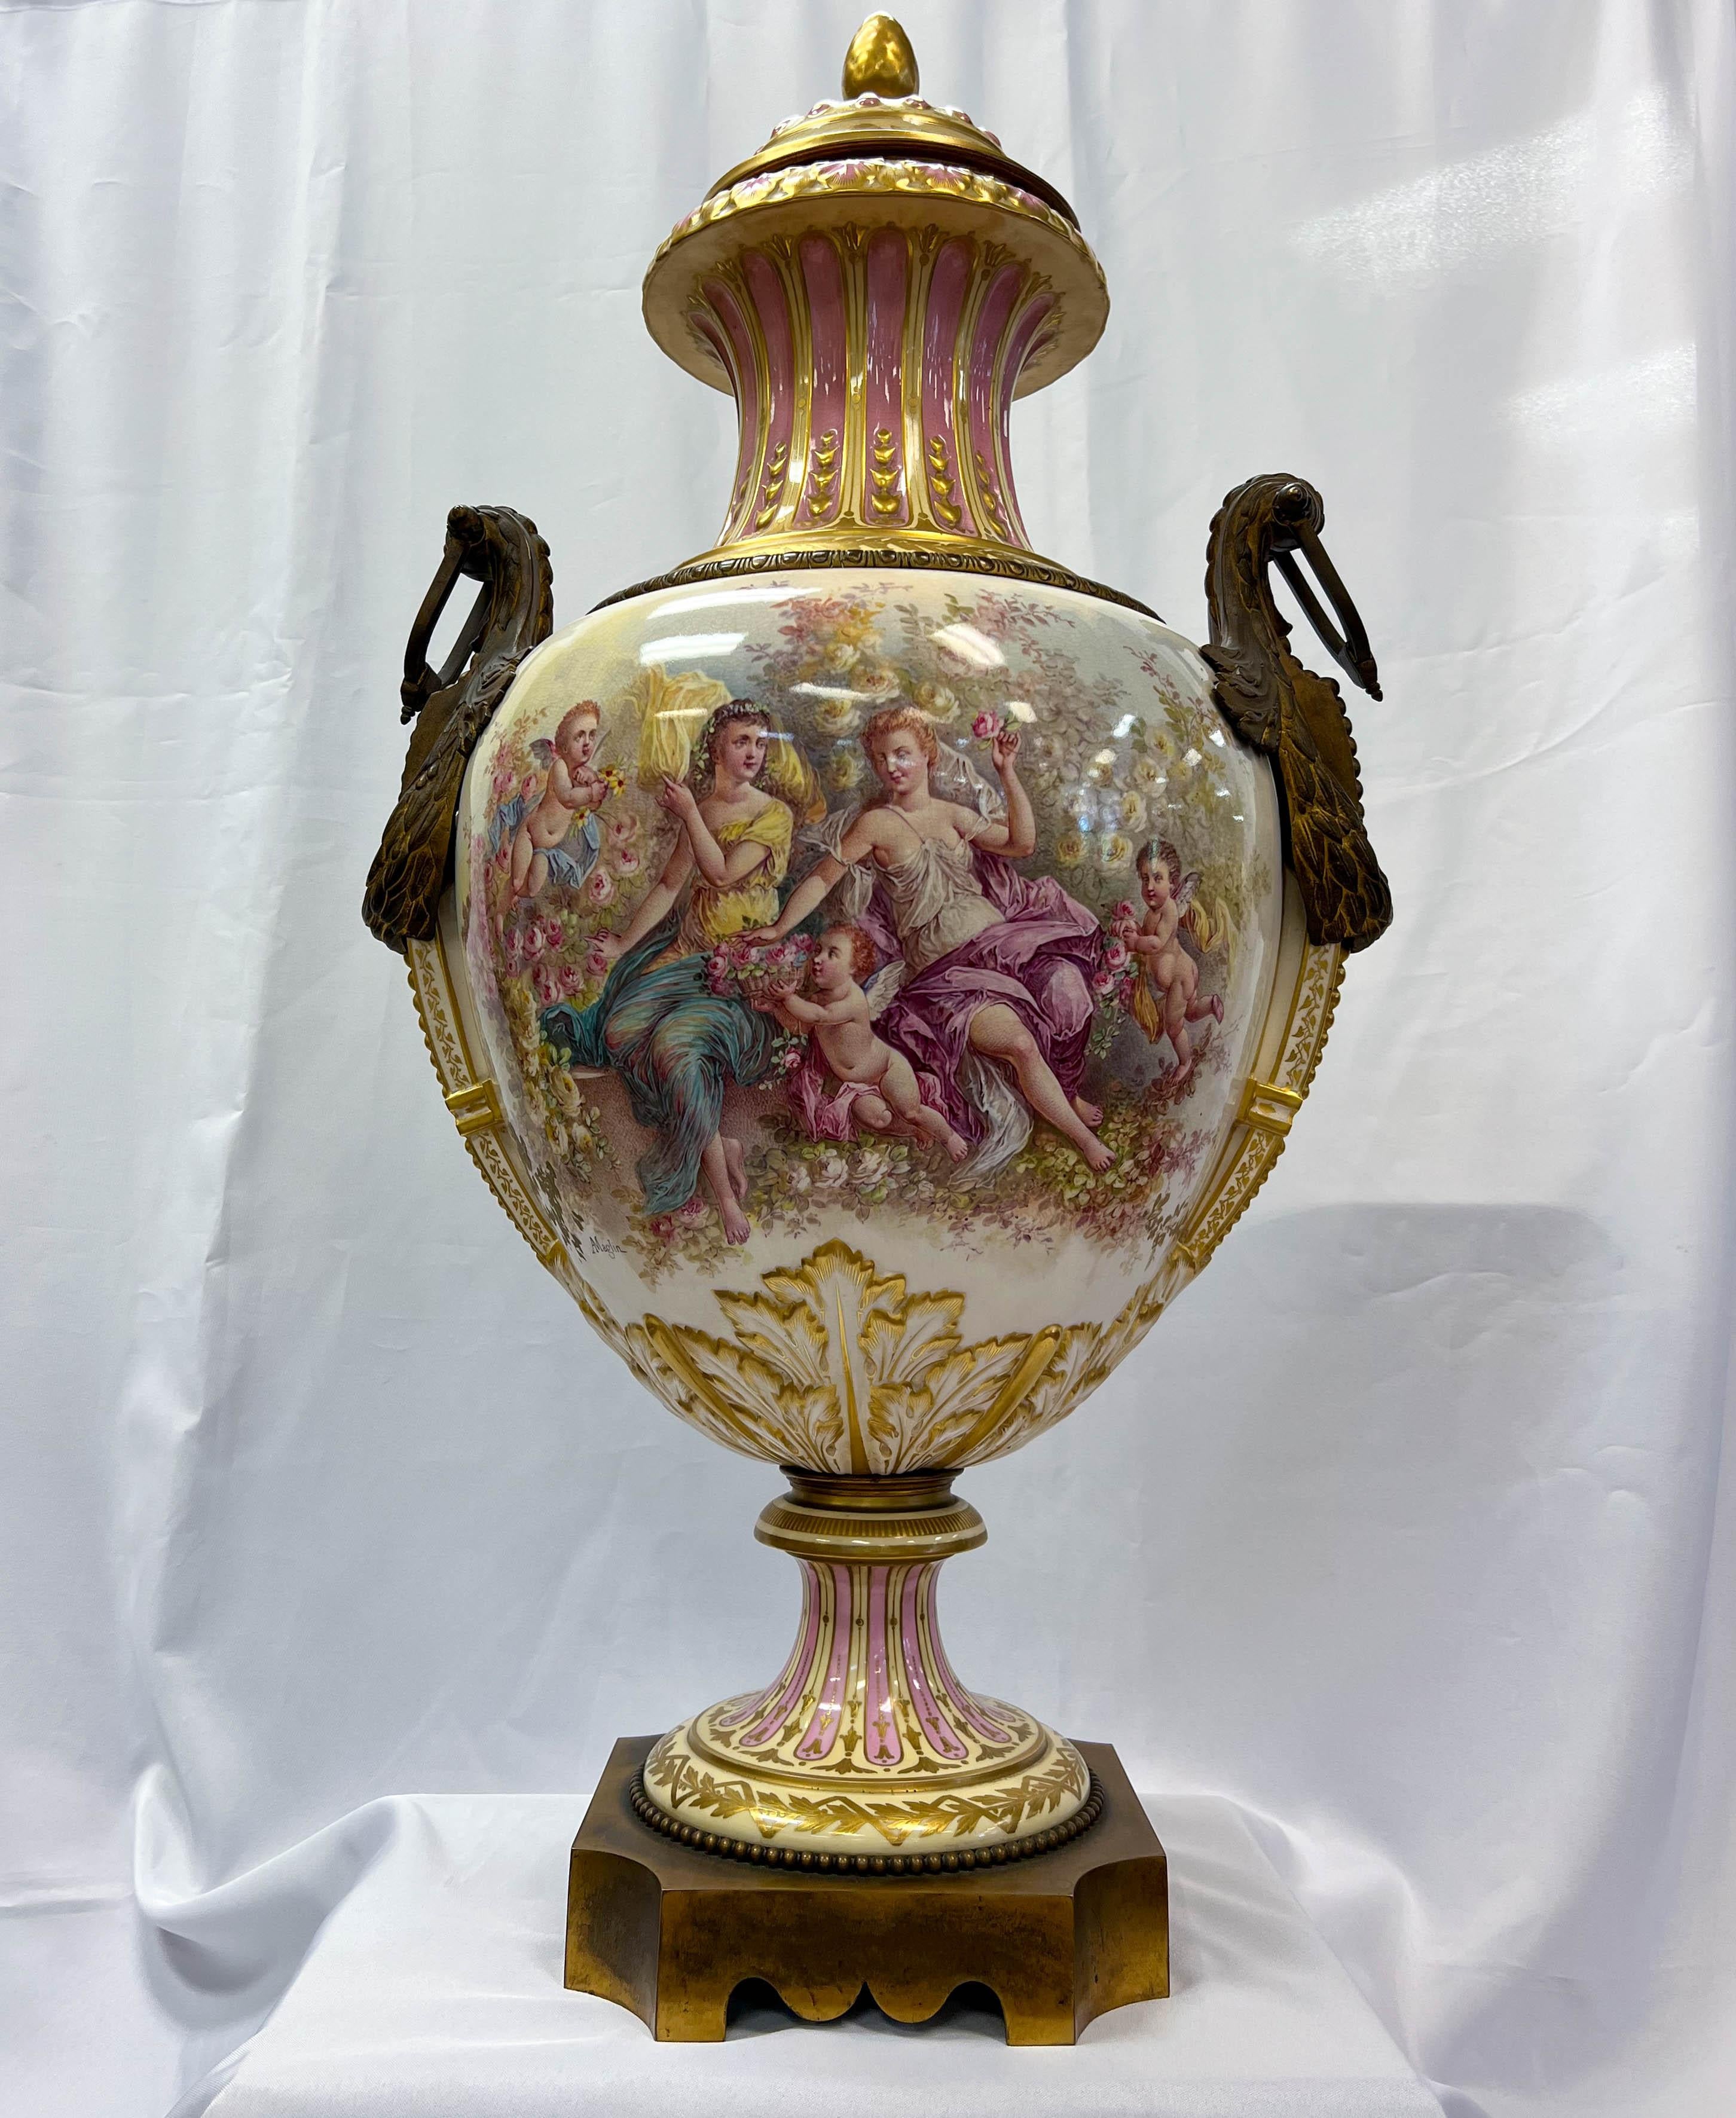 A palatial 19th Century French ormolu mounted Sèvres urn, exemplifying the elegant Neoclassical style crafted from the finest hard-paste porcelain, also known as 